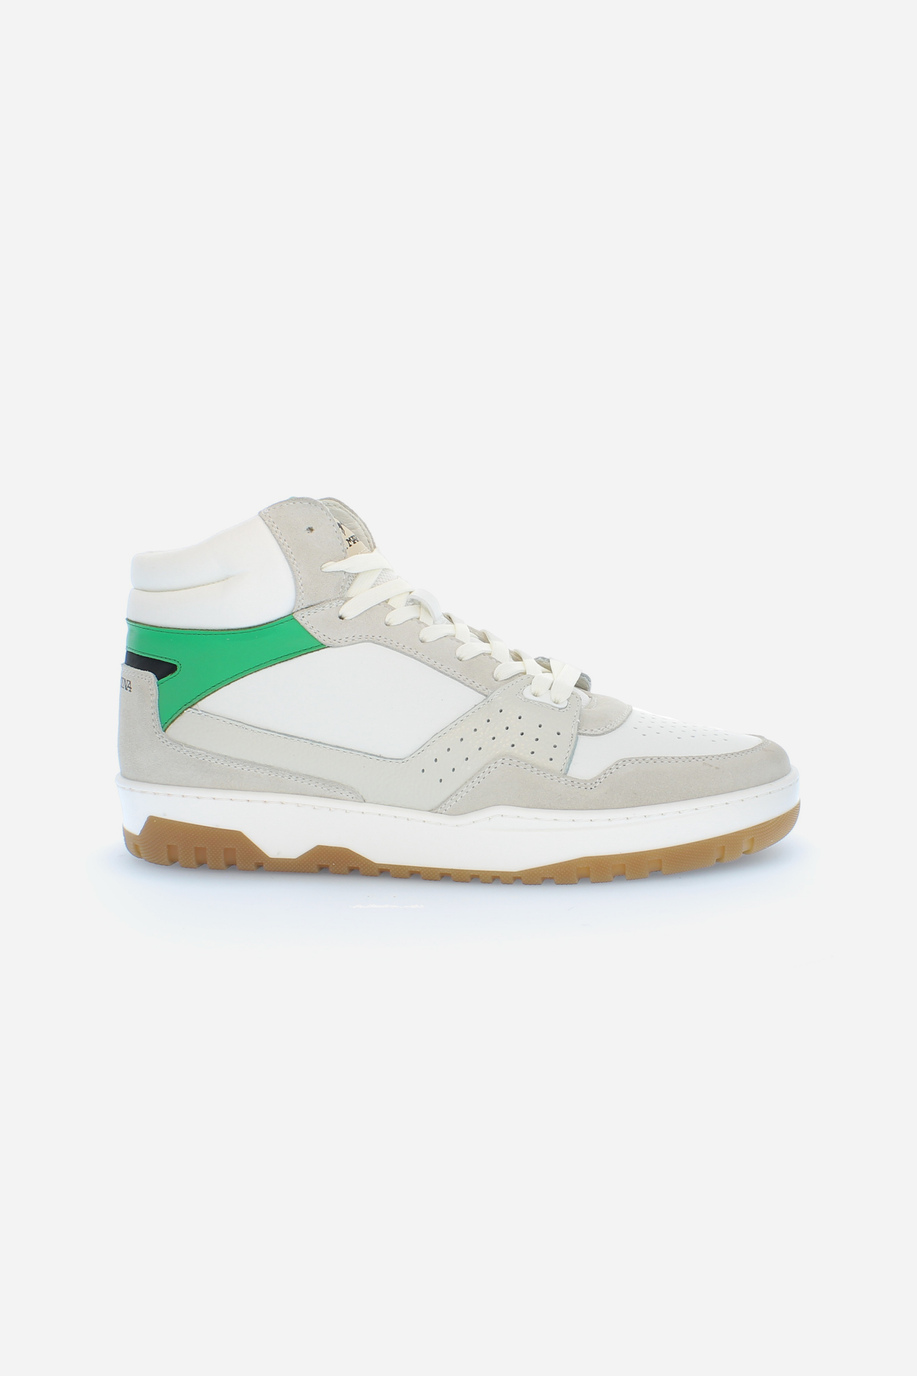 Men’s sneaker vintage basketball shoe in mixed vegetable suede - Field 85 - Shoes and Accessories | La Martina - Official Online Shop